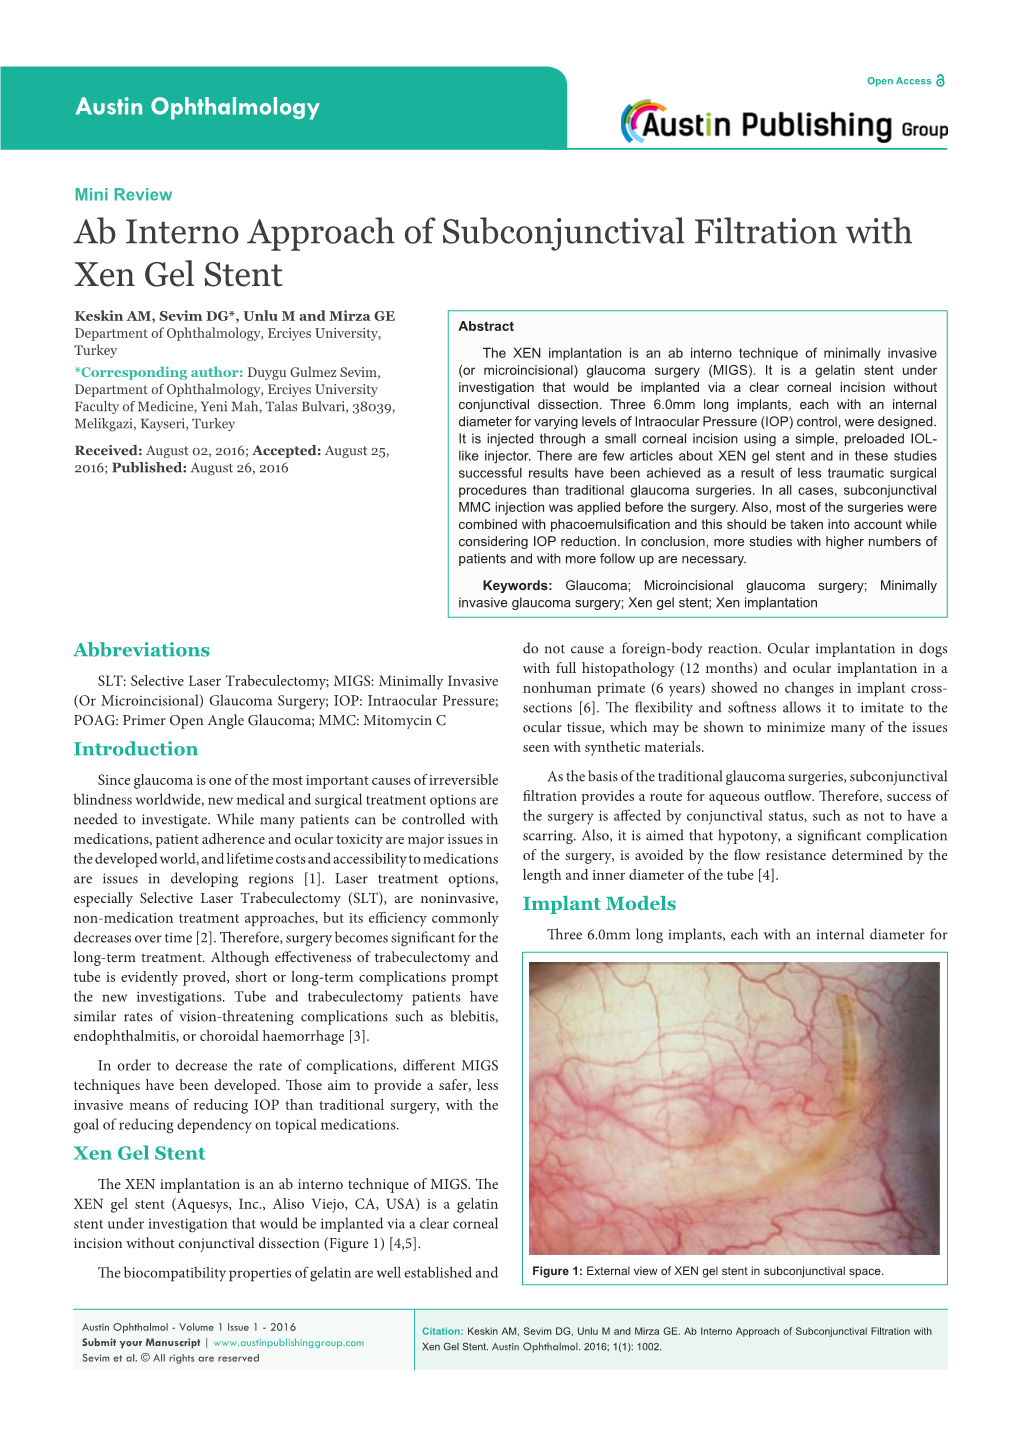 Ab Interno Approach of Subconjunctival Filtration with Xen Gel Stent